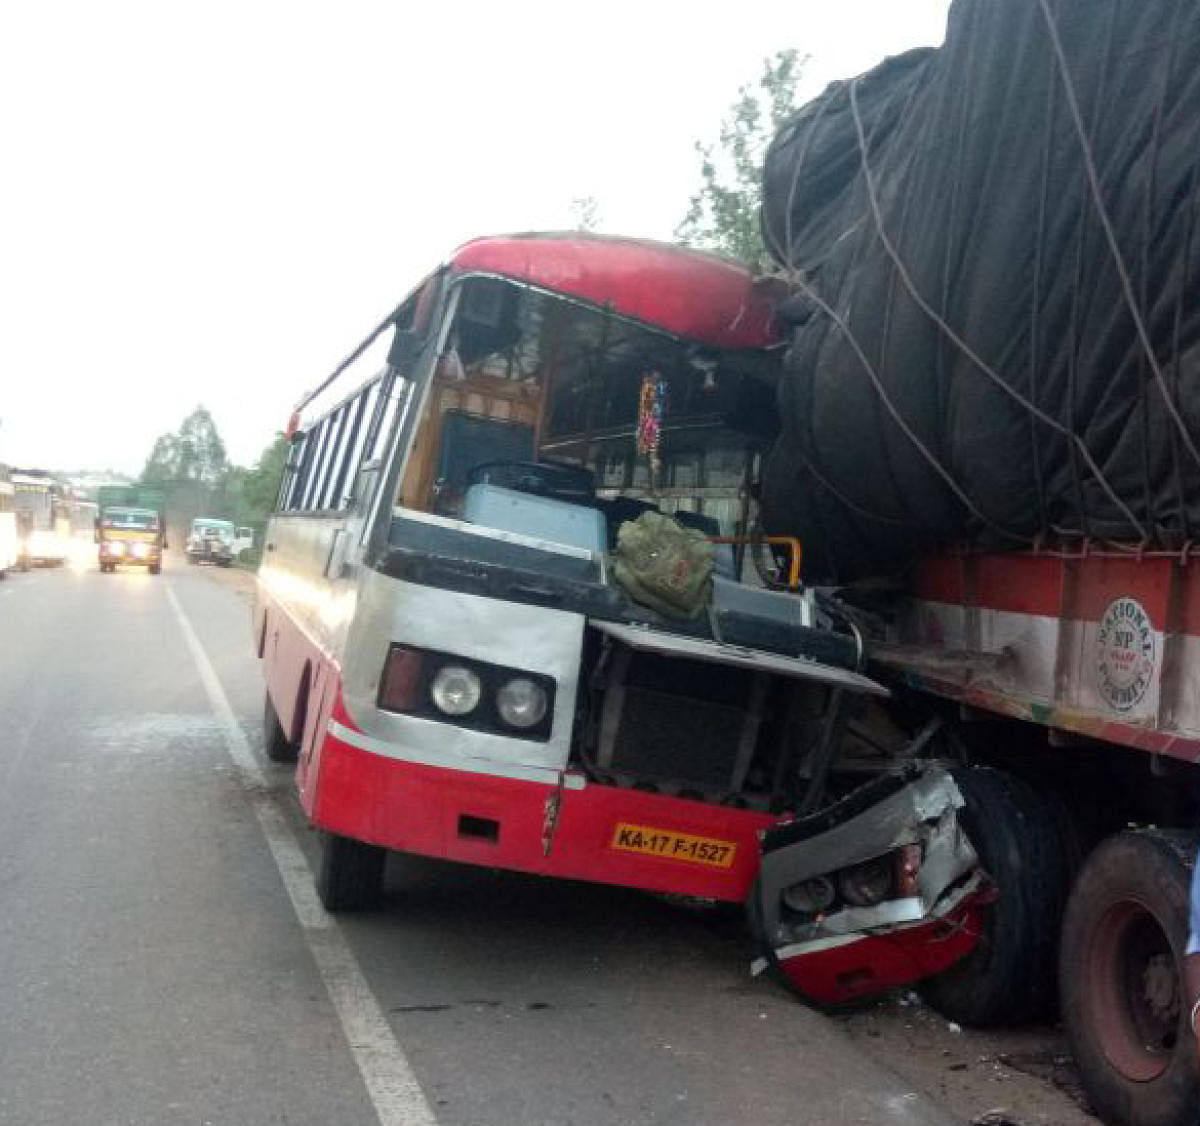 The mangled remains of the KSRTC bus after it ploughed into a parked truck near Nelamangala on Tuesday, killing two people.